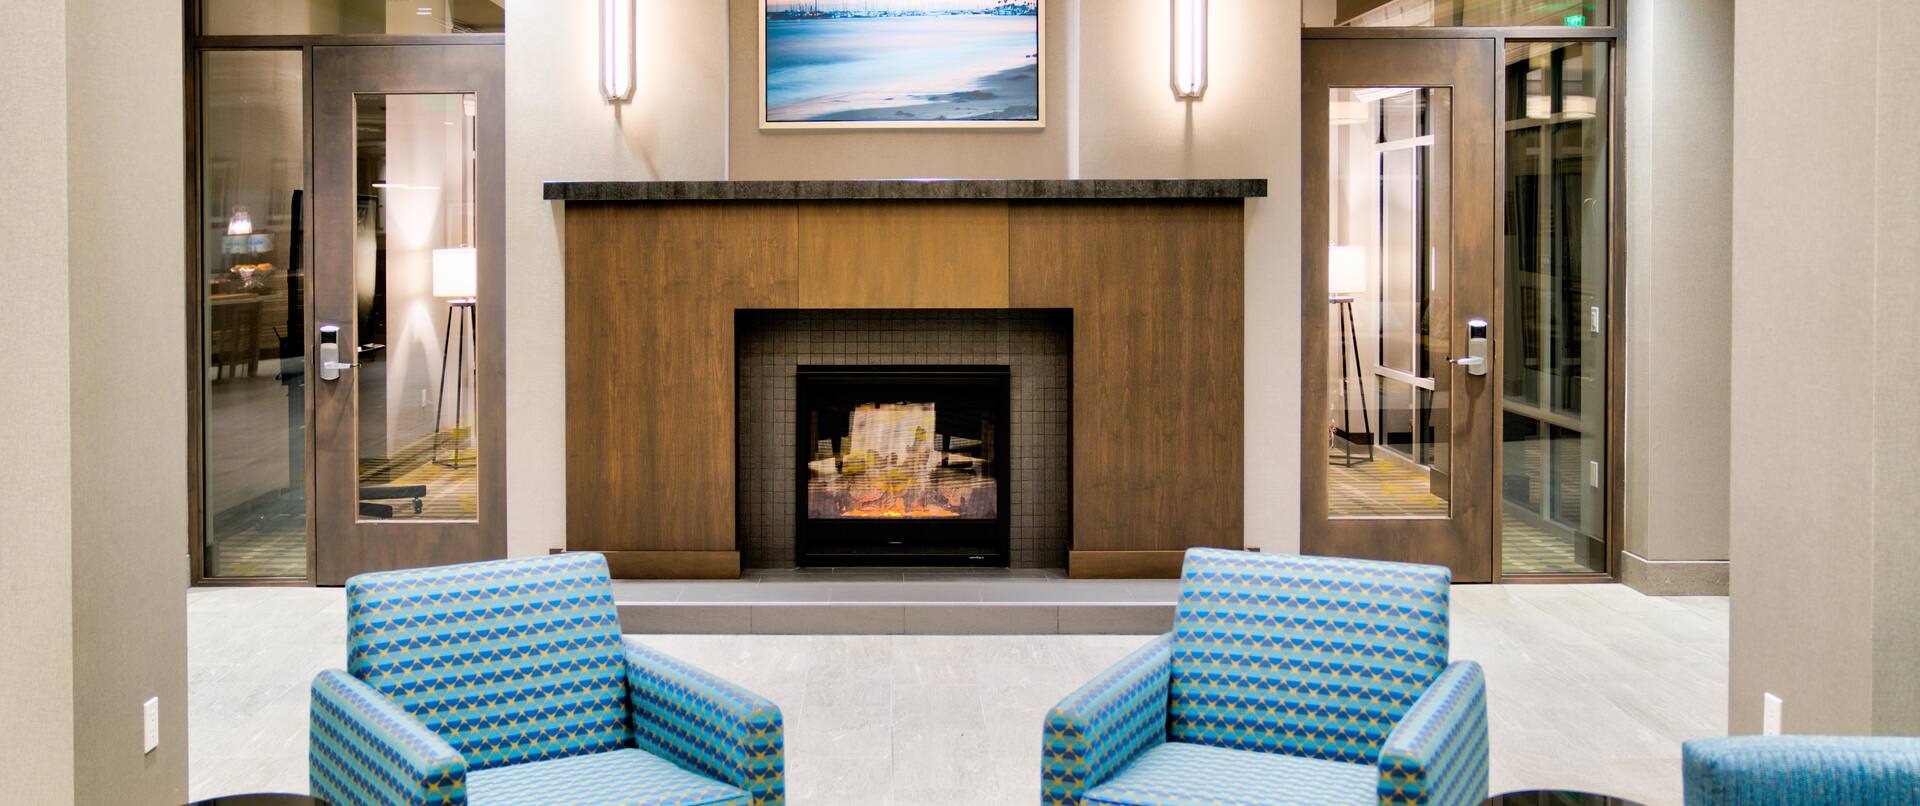 Lobby Area with Seats by the Fireplace